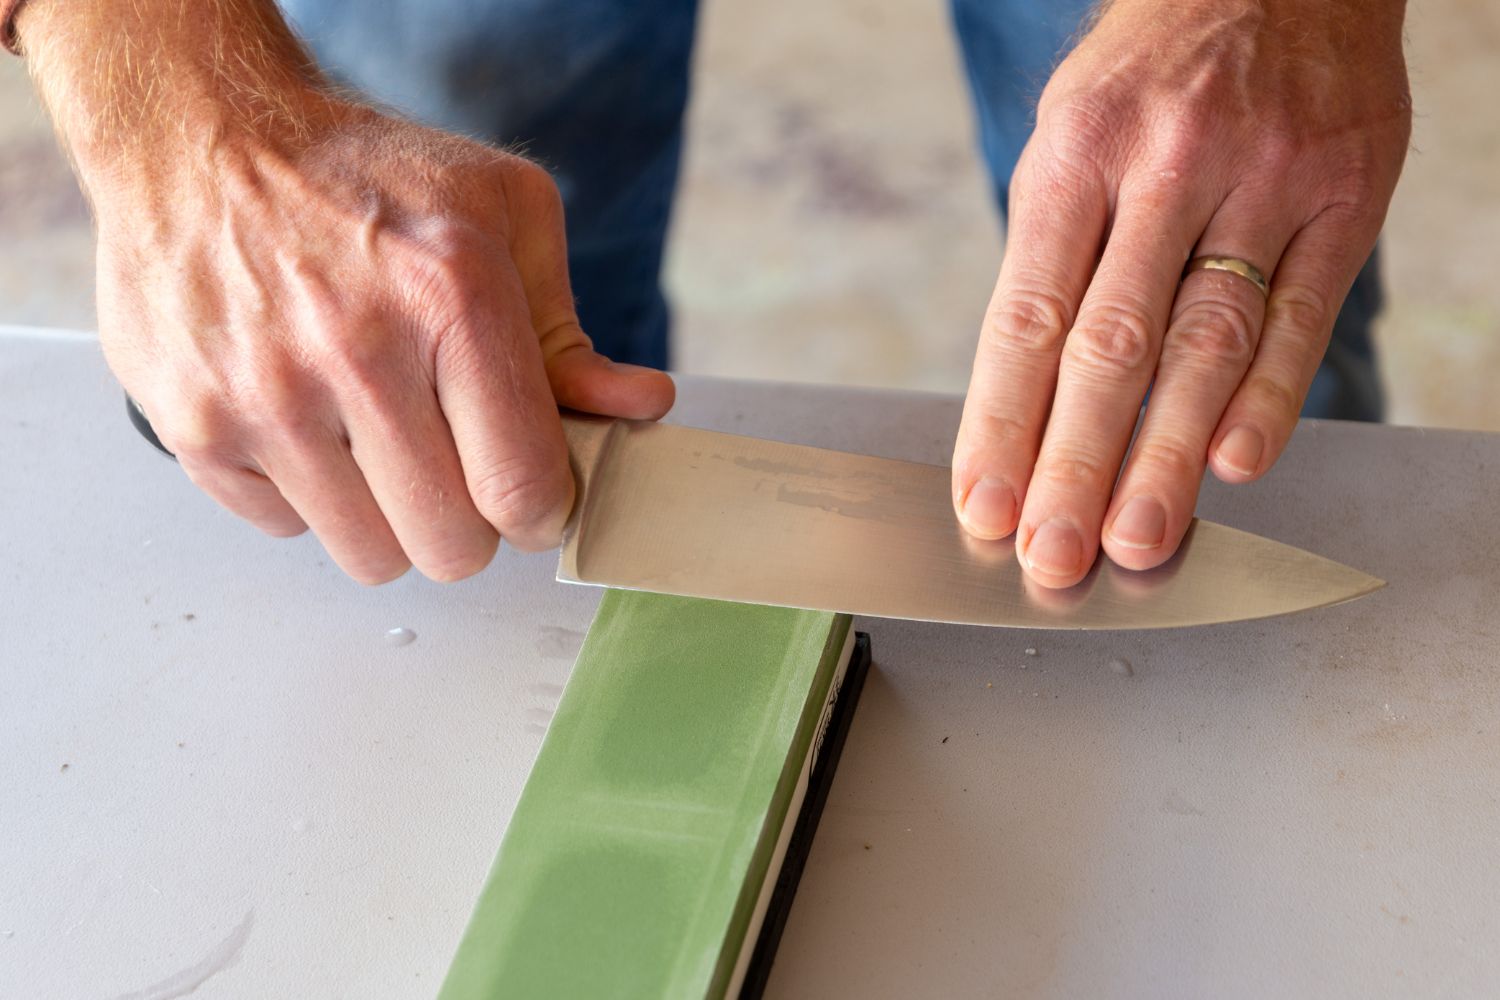 A person using the best sharpening stone option to grind the edge of a chef's knife to maintain a sharp edge.